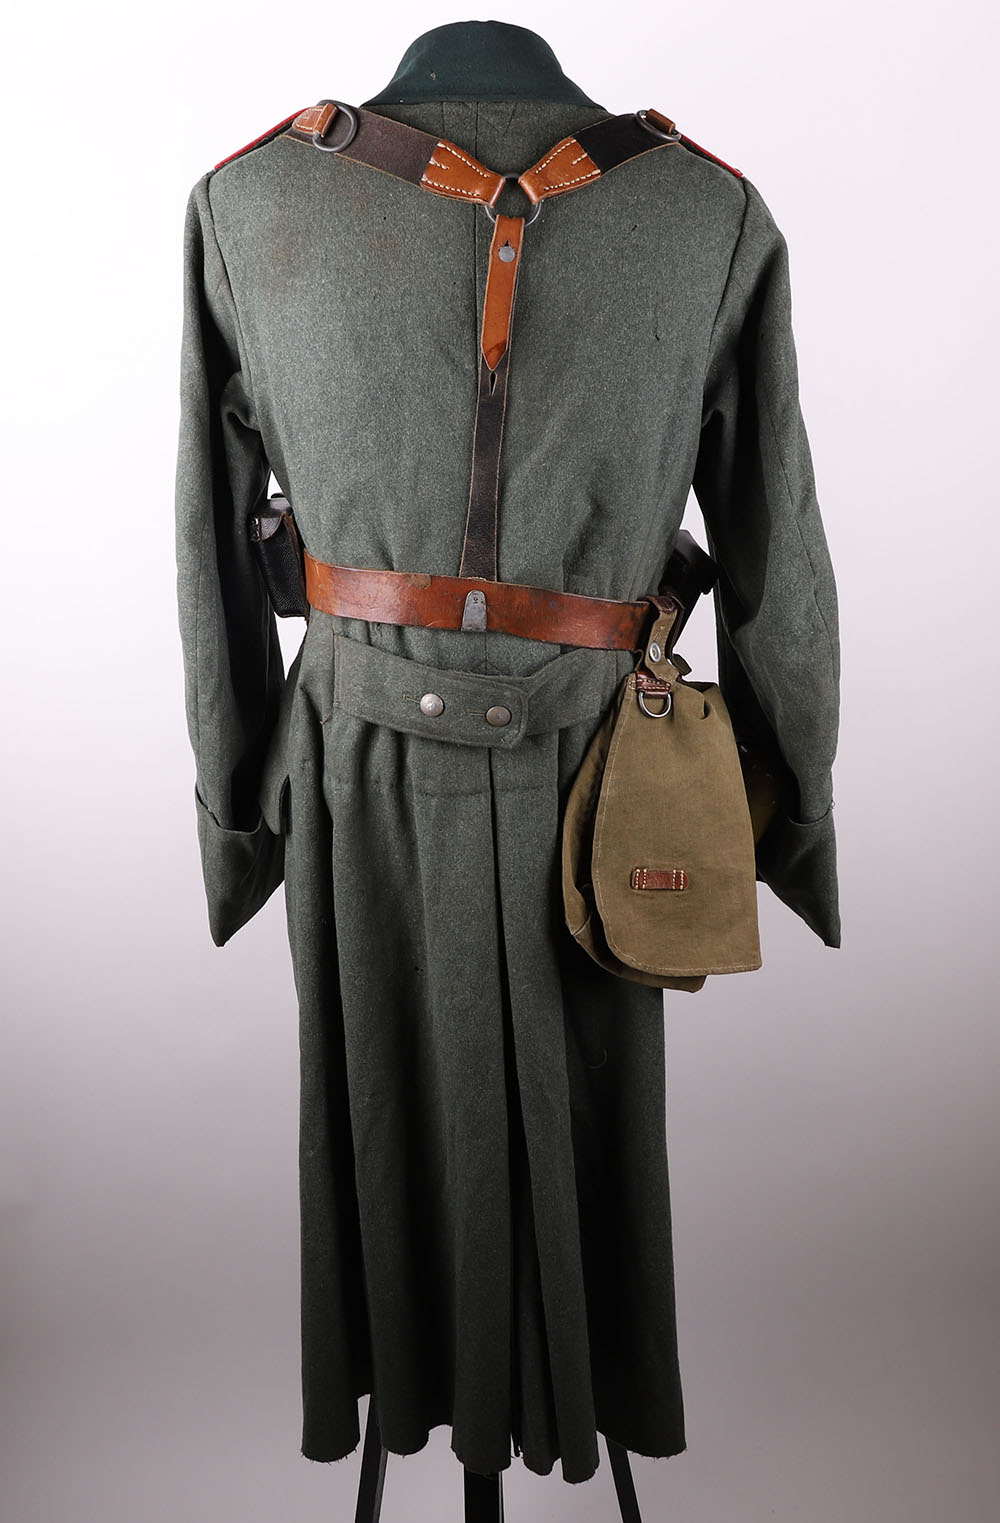 WW2 German Army Greatcoat, Overseas Cap and Equipment Set - Image 6 of 23